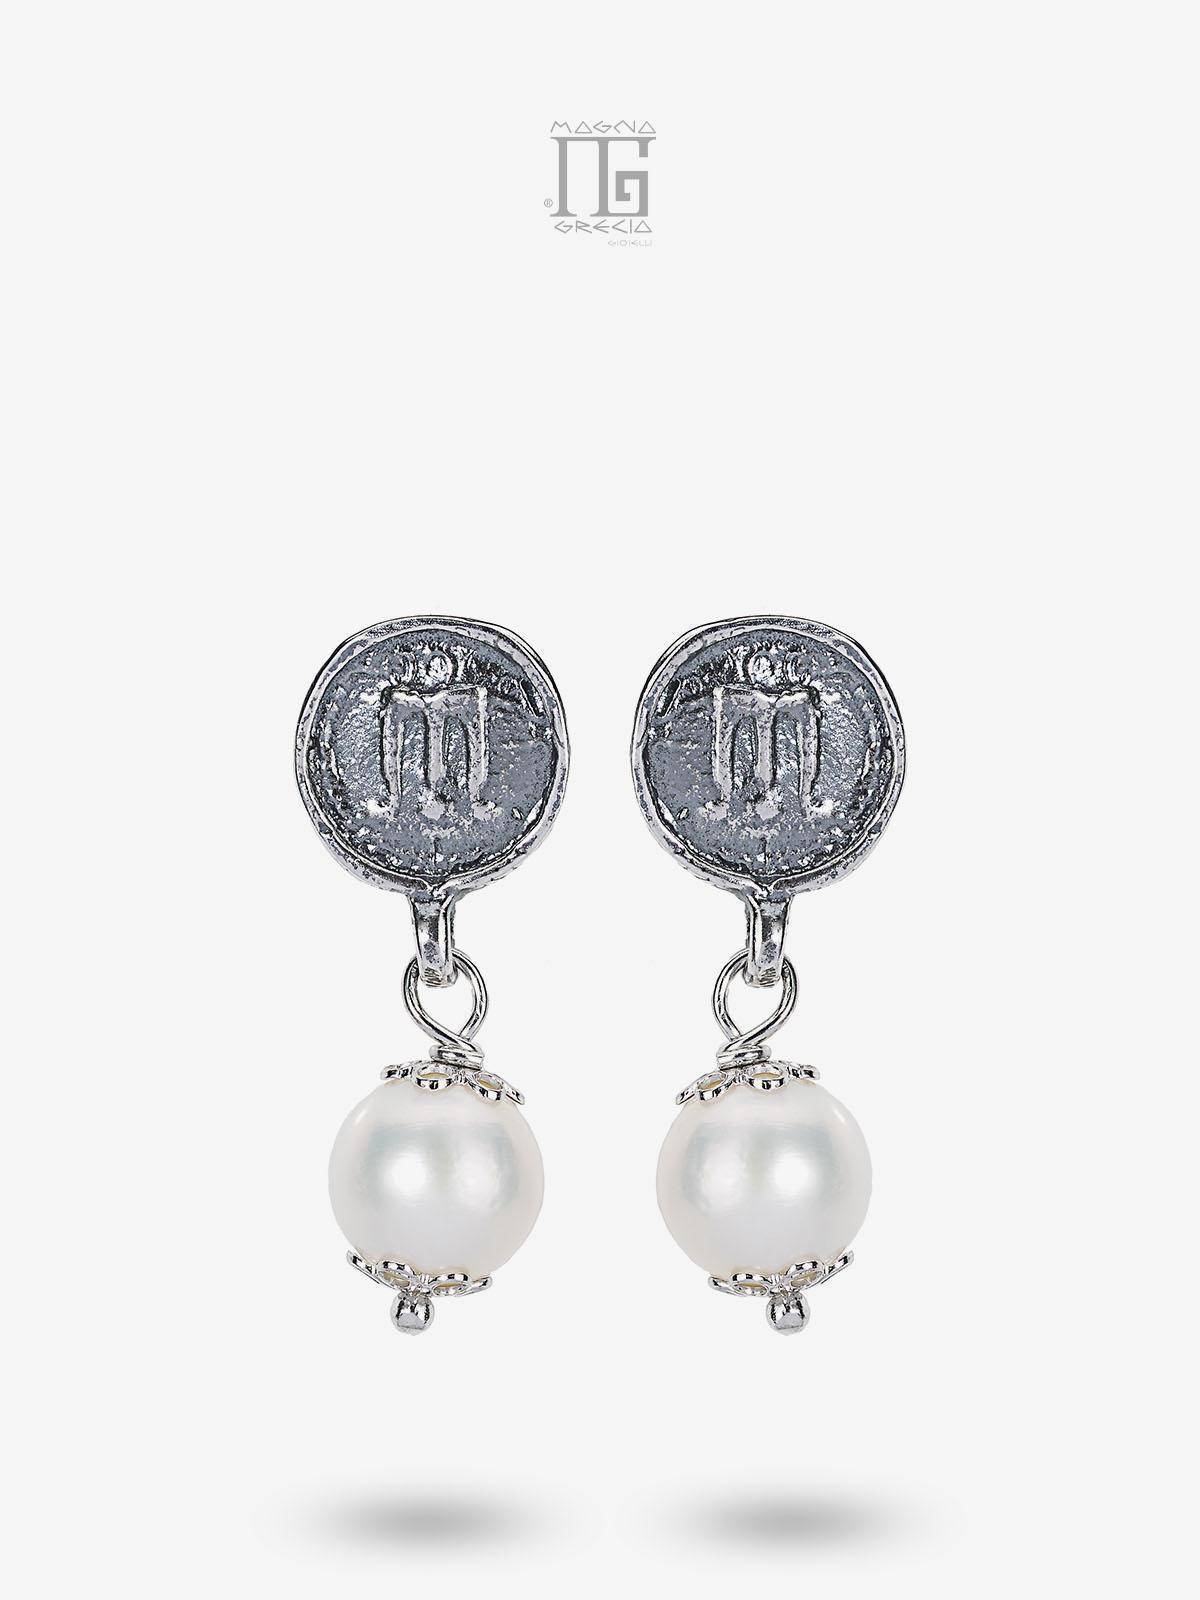 Silver earrings with natural freshwater pearls Cod. MGK 4029 V